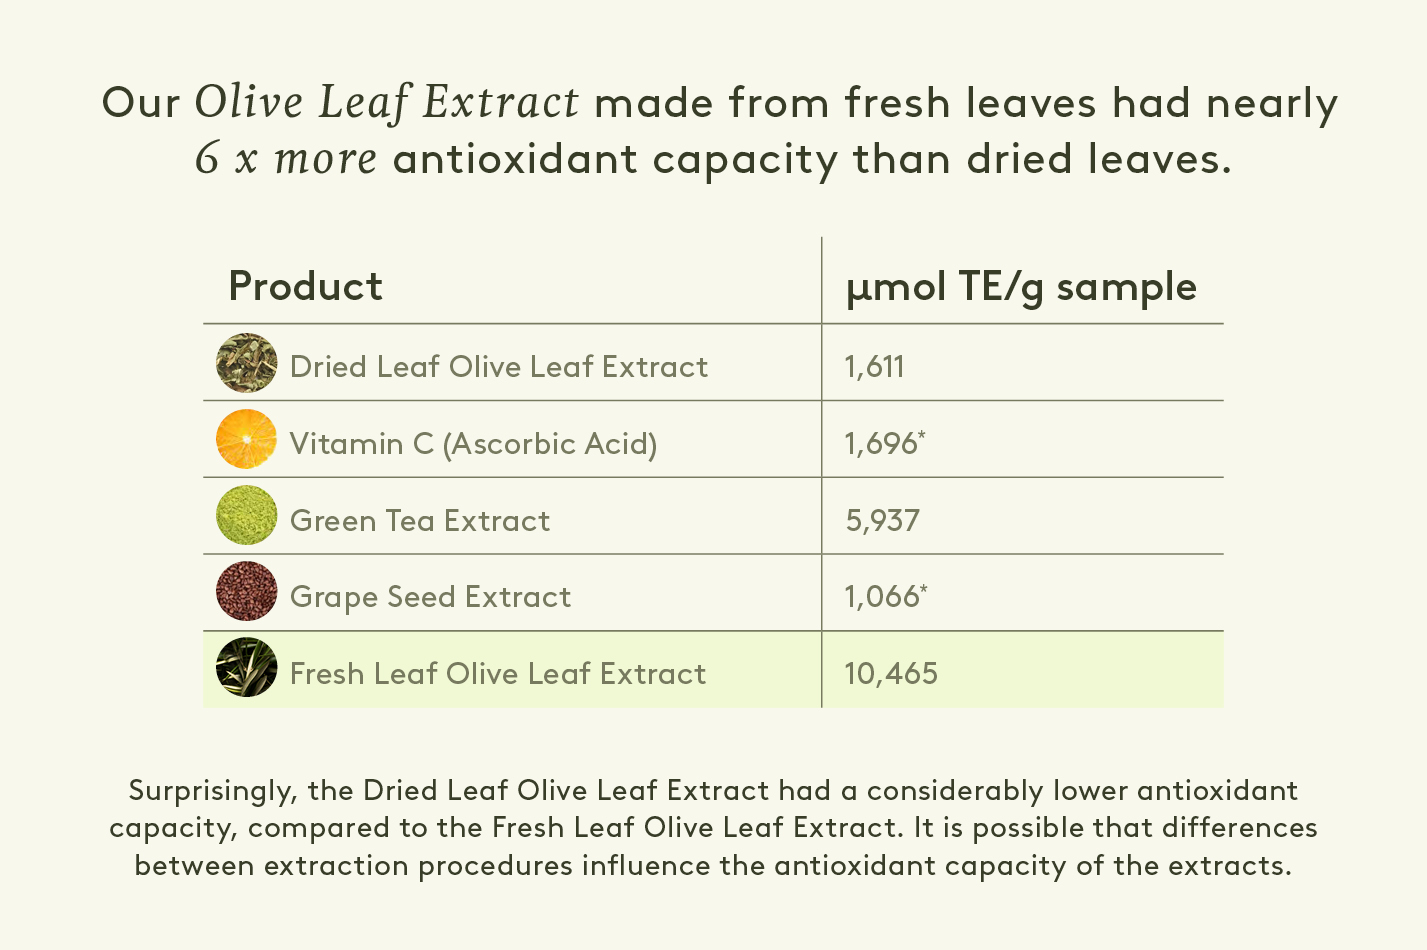 Fresh Picked Olive lieaf has 6 x more antioxidant capacity than dried leaves